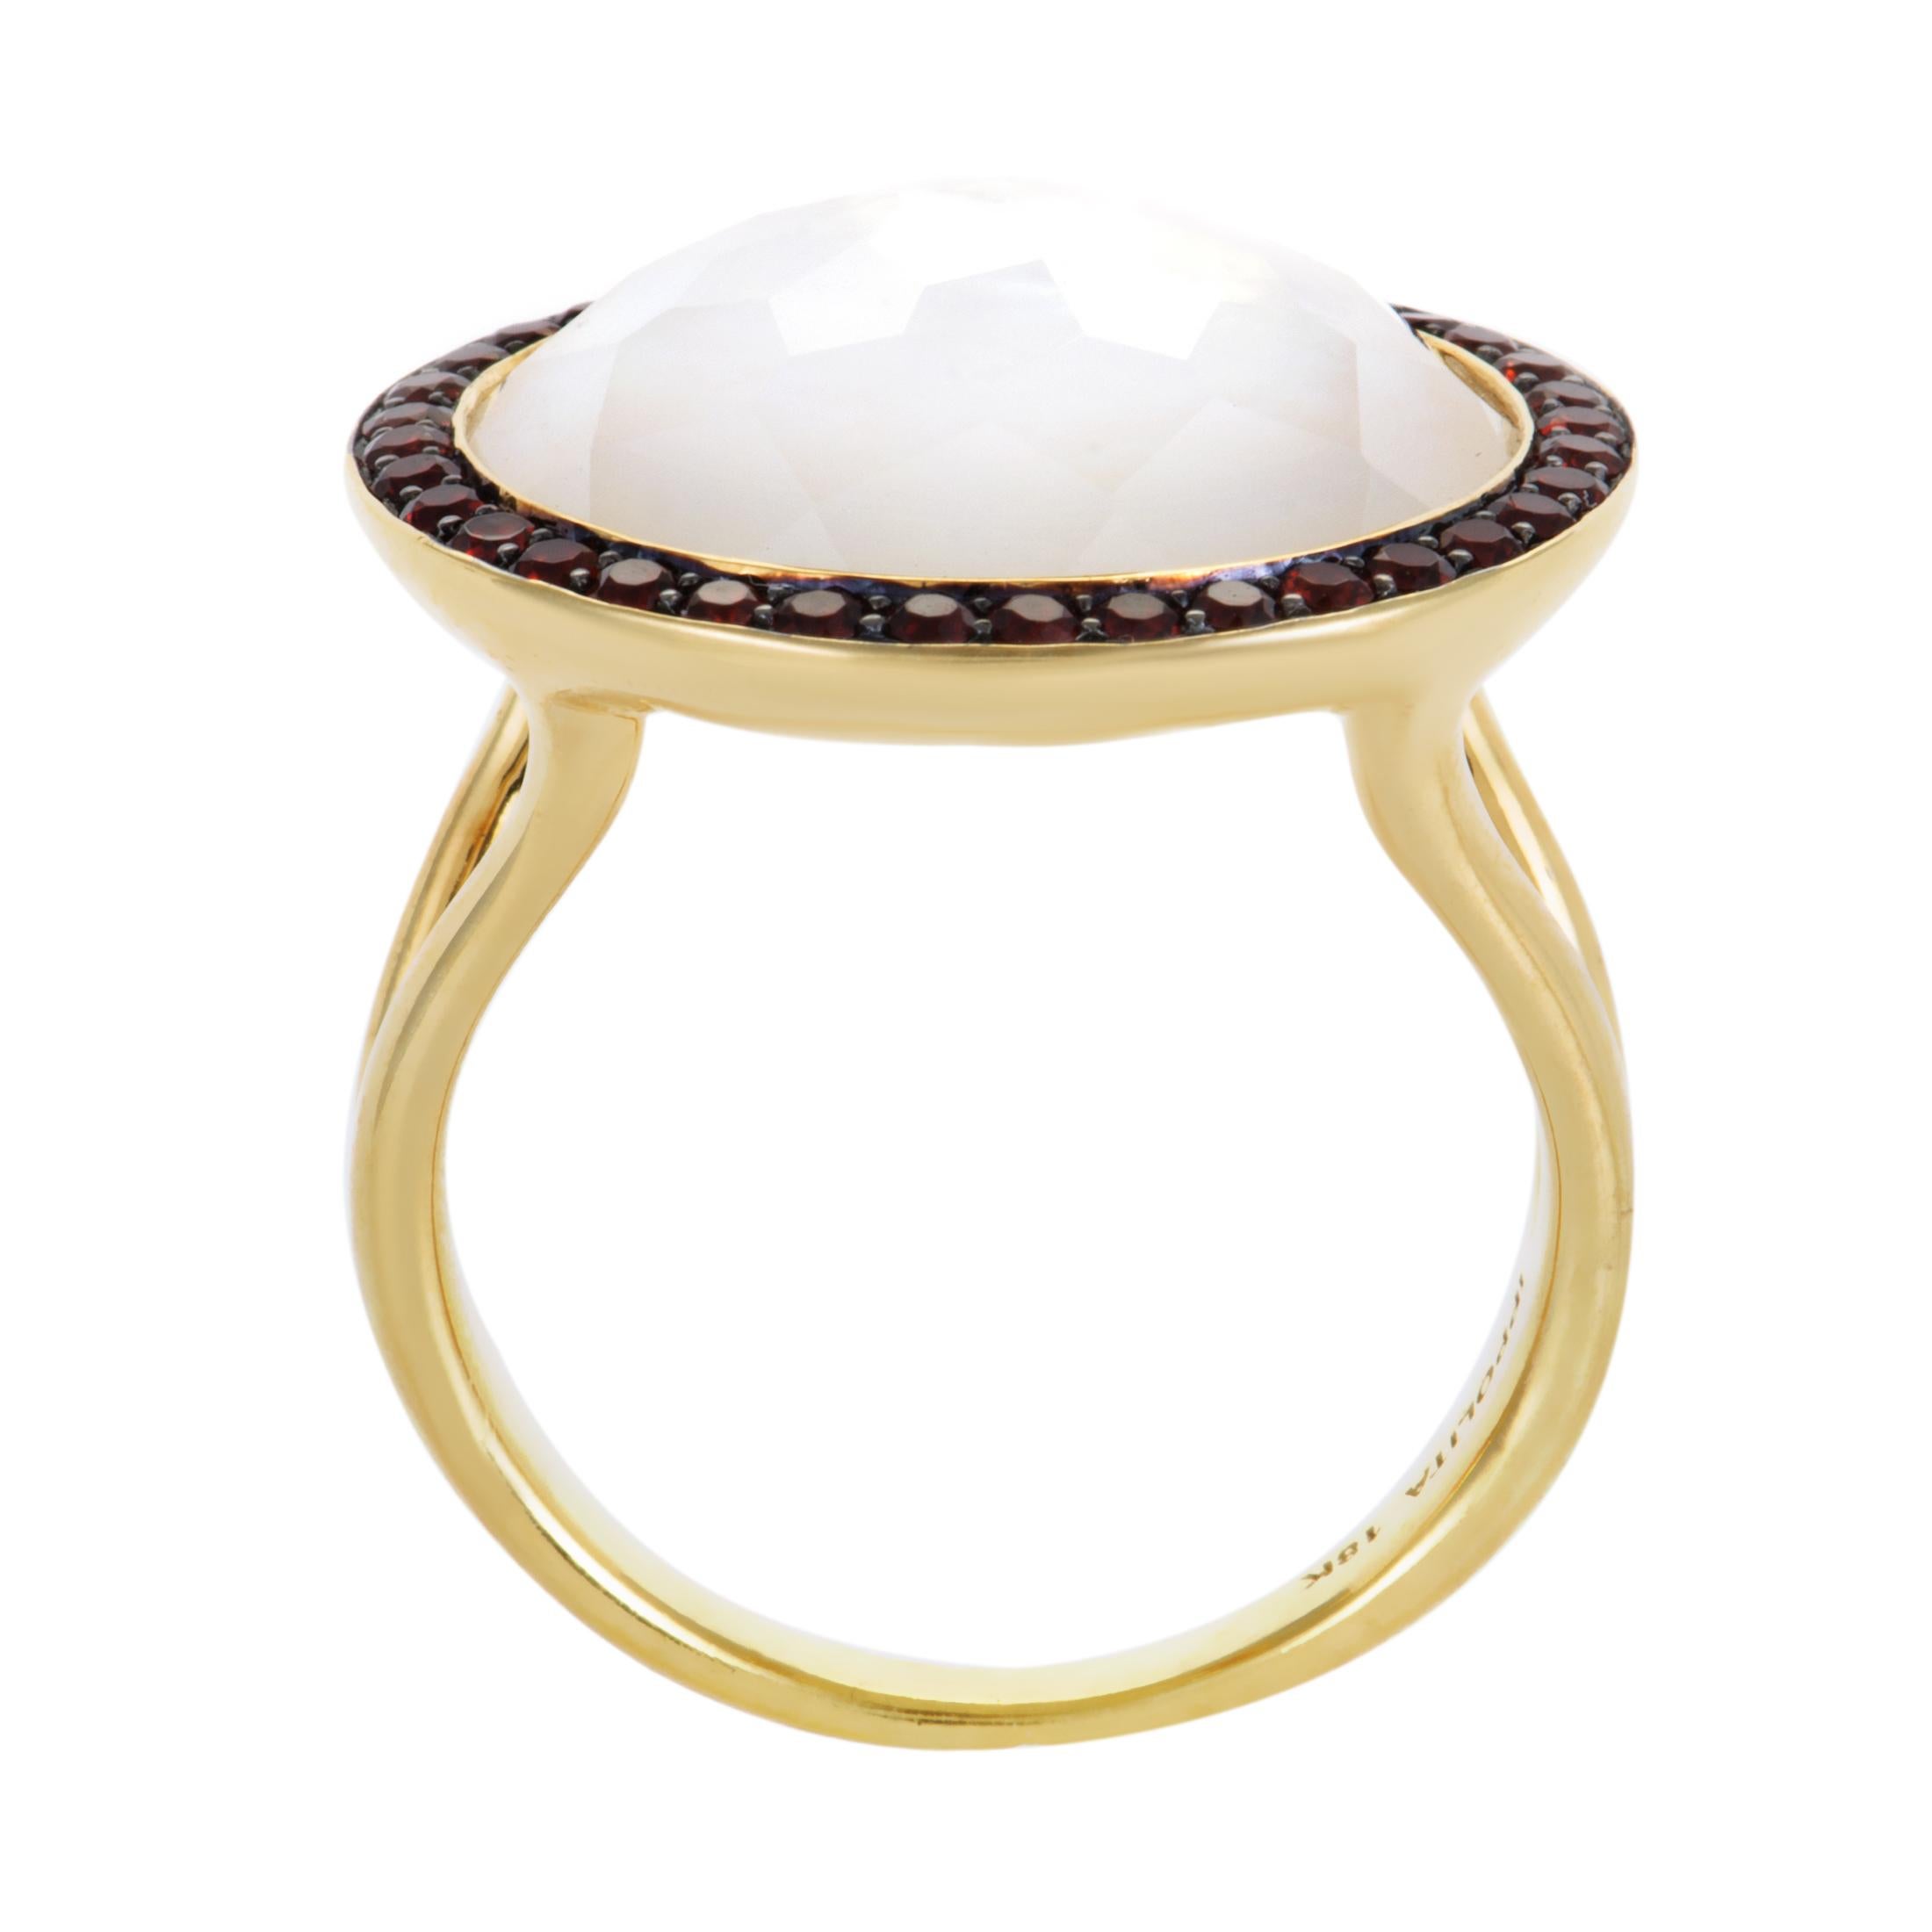 Exuding their majestic nuance in an exuberant and passionate manner, the gorgeous garnets neatly encircle the marvelous mother of pearl in this outstanding 18K yellow gold ring from the esteemed “Lollipop” collection by Ippolita.
Ring Top